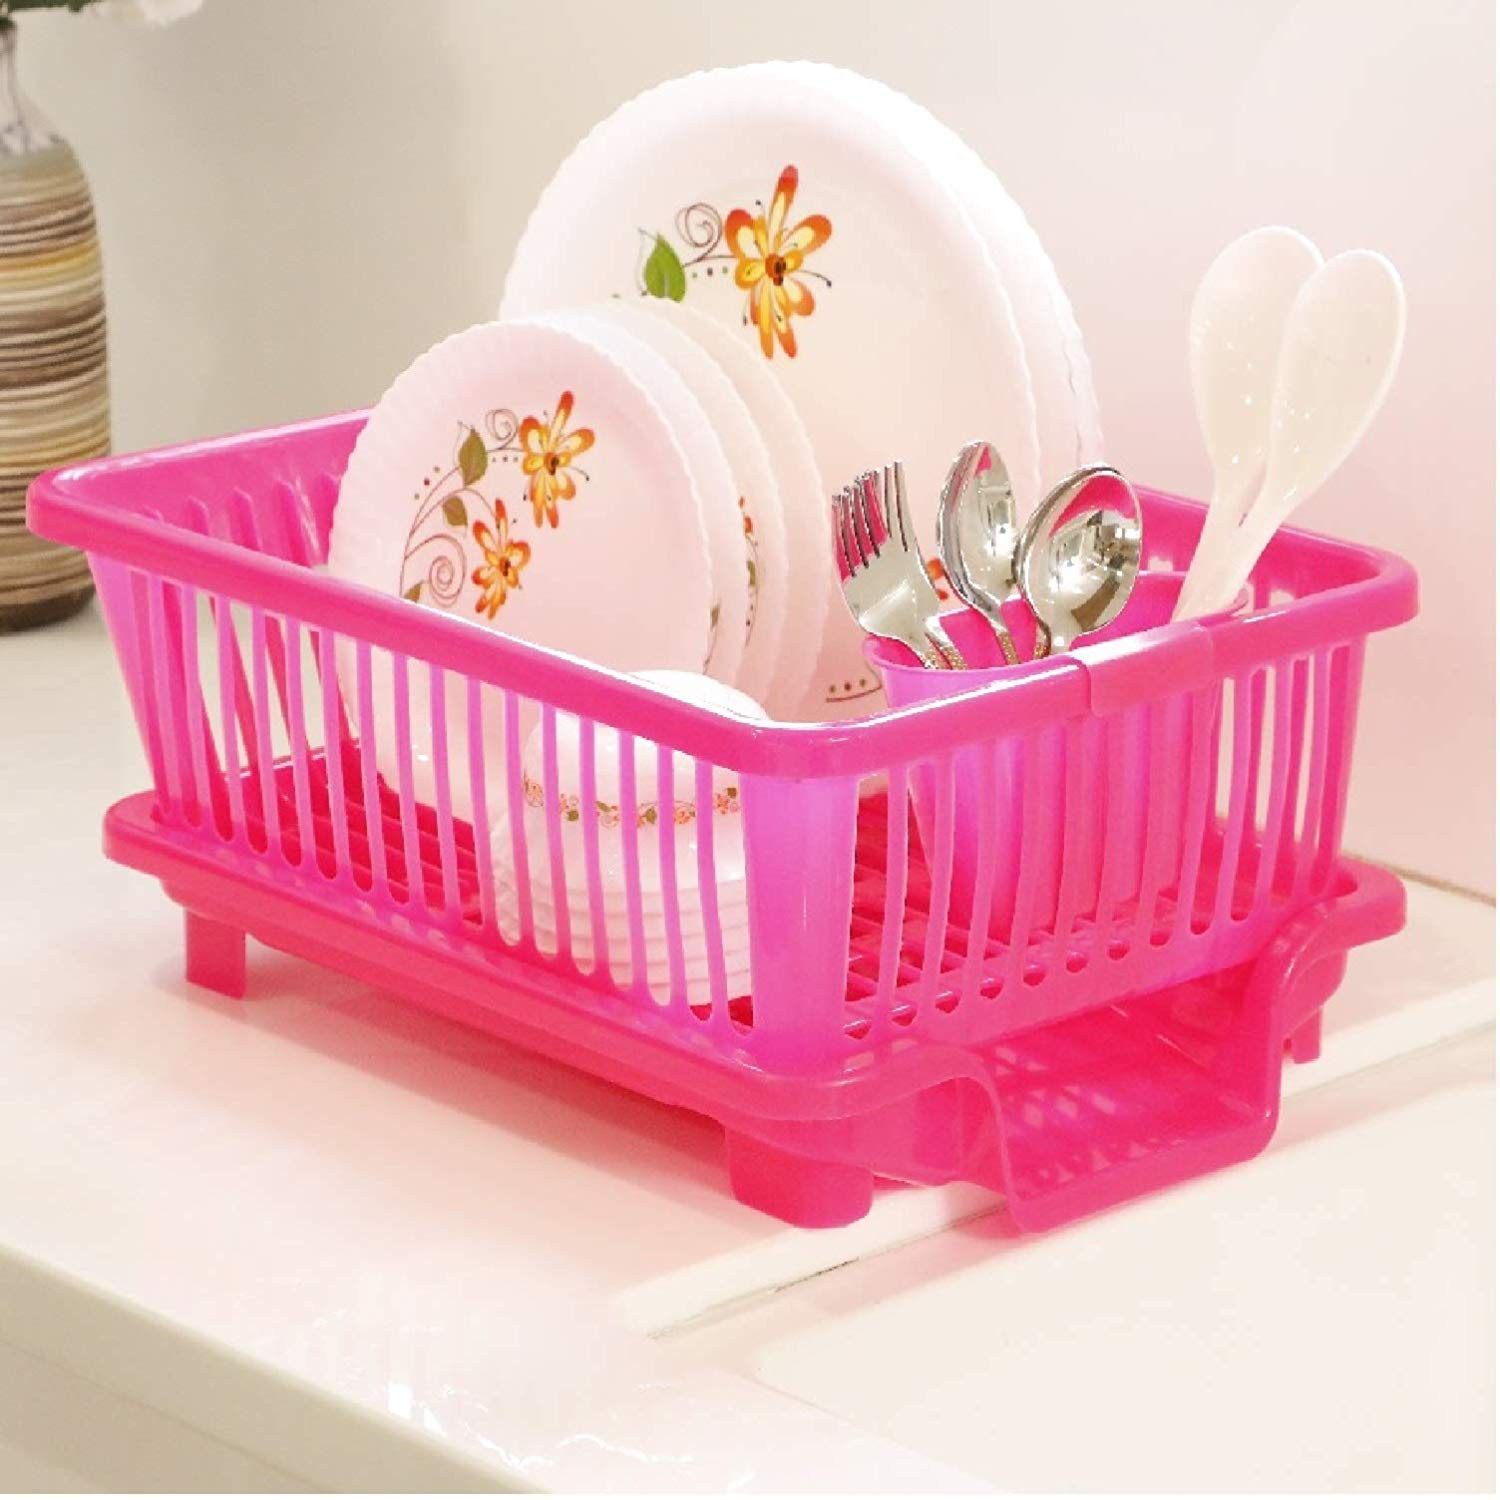 Kuber Industries  3 in 1 Large Durable Plastic Kitchen Sink Dish Rack Drainer Drying Rack Washing Basket with Tray for Kitchen, Dish Rack Organizers, Utensils Tools Cutlery (Pink)